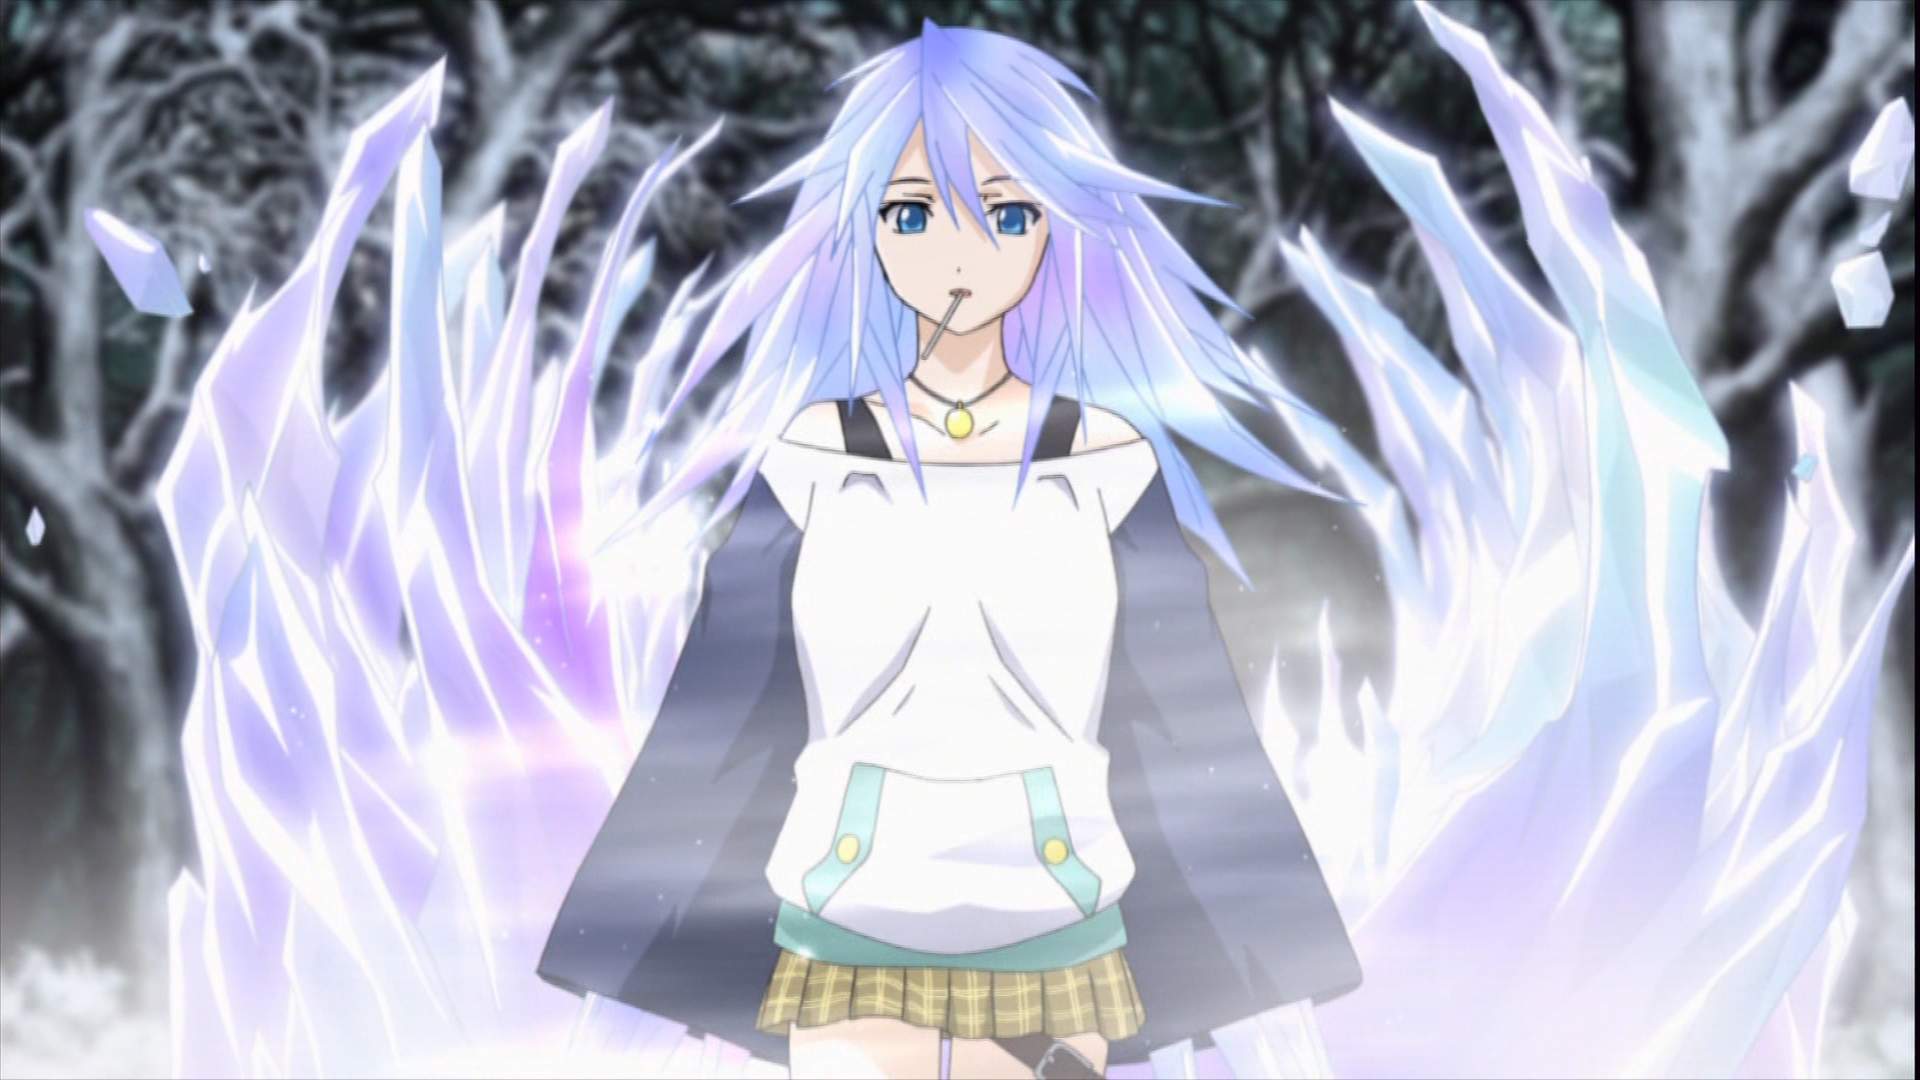 Mizore Shirayuki from Rosario + Vampire, a character with striking blue hair, adorned in an anime-style outfit.